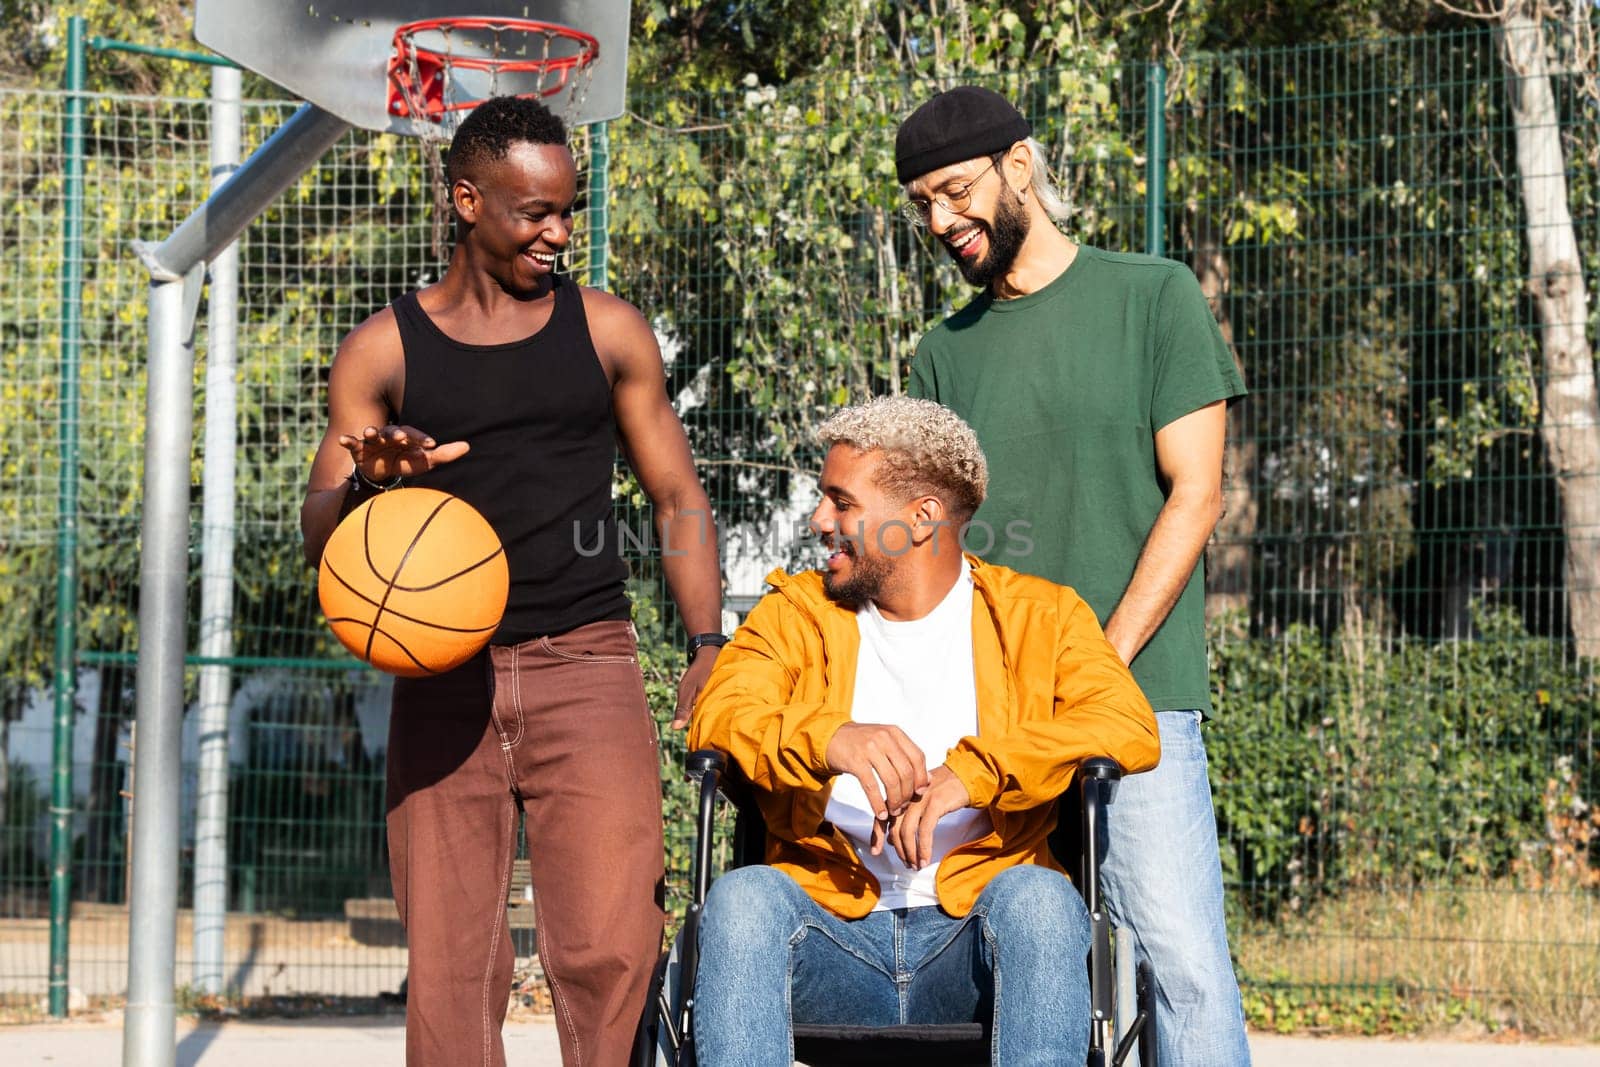 Young Black man in a wheelchair talking and laughing with friends in basketball court outdoors. Sports and friendship concept.